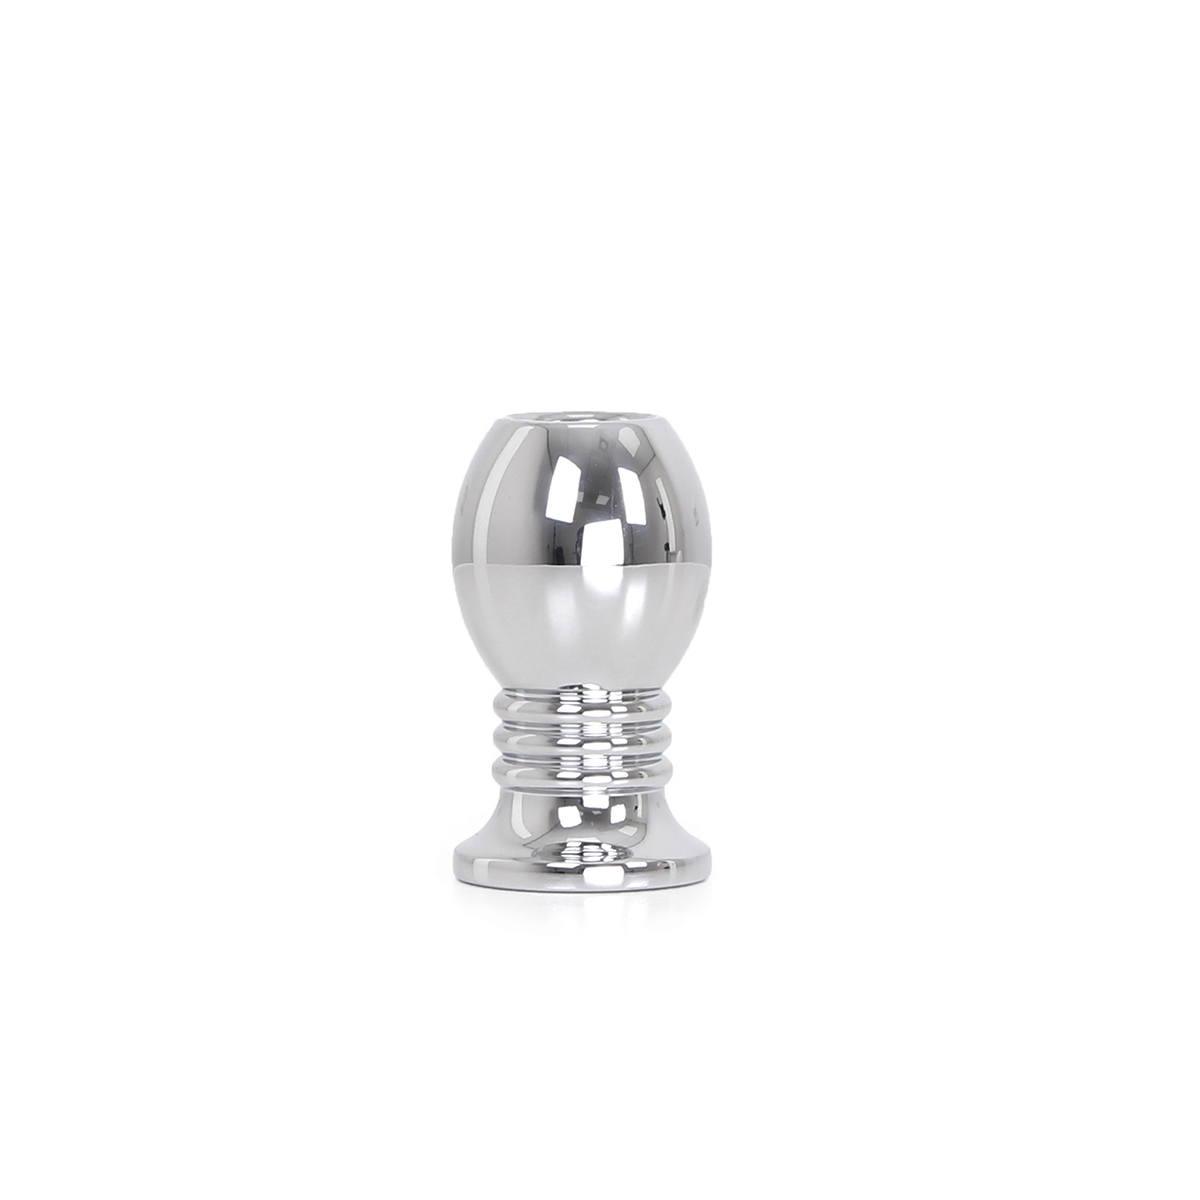 Hollow-Anal-Plug-Ribbed-OPR-2820048-3